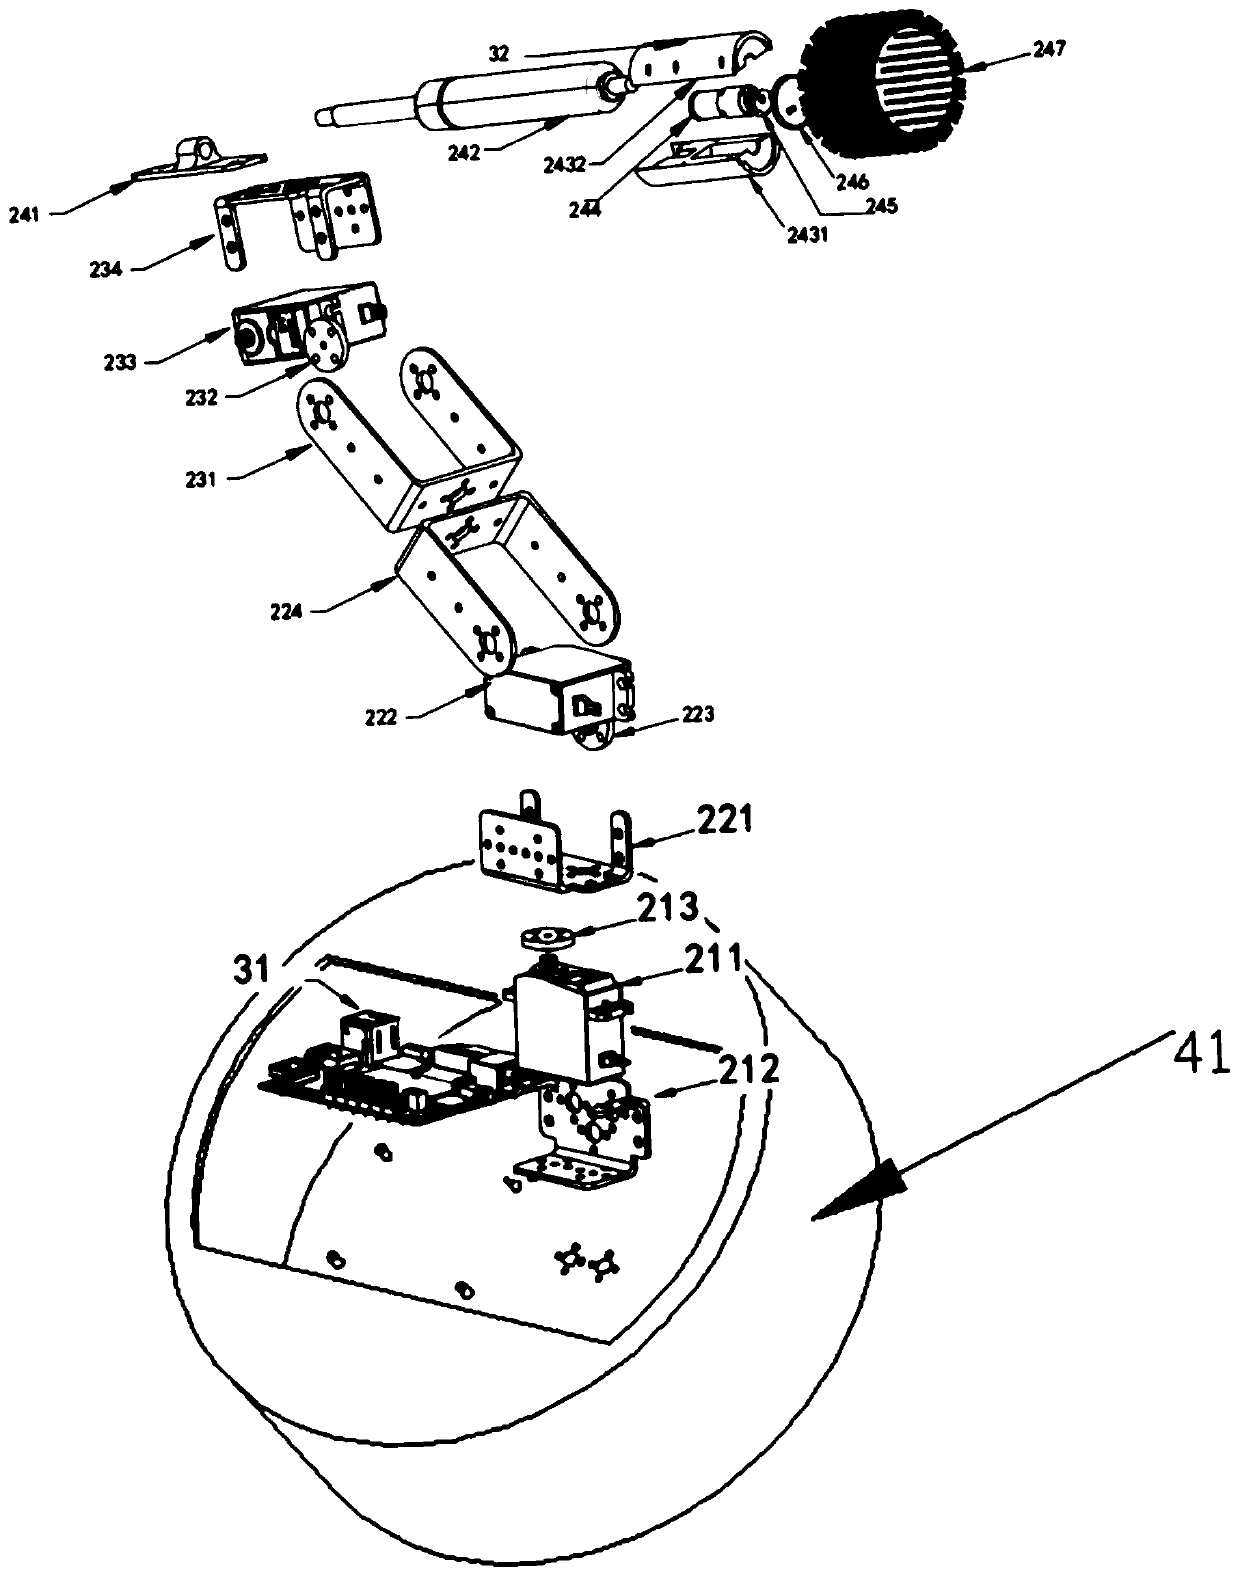 Intelligent squatting pan cleaning device and method